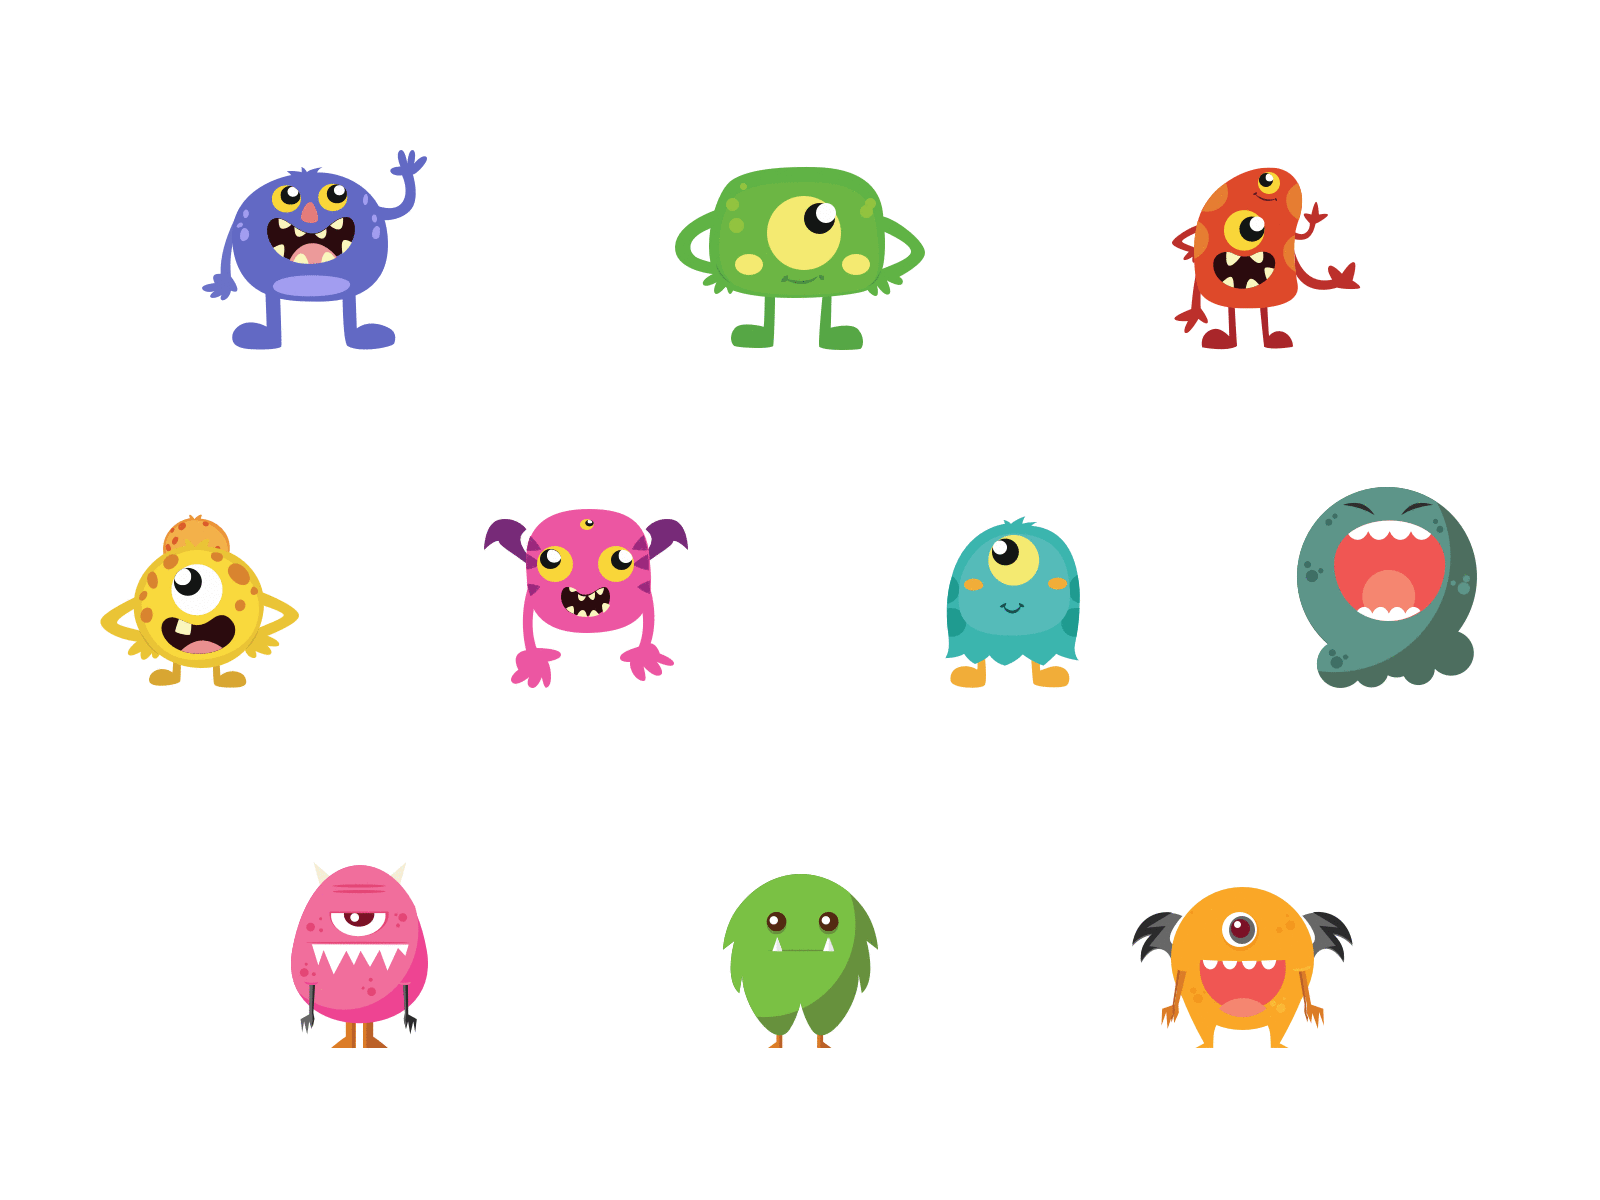 Meet the Matevo monsters and see them evolve app design graphic design illustration ui ux